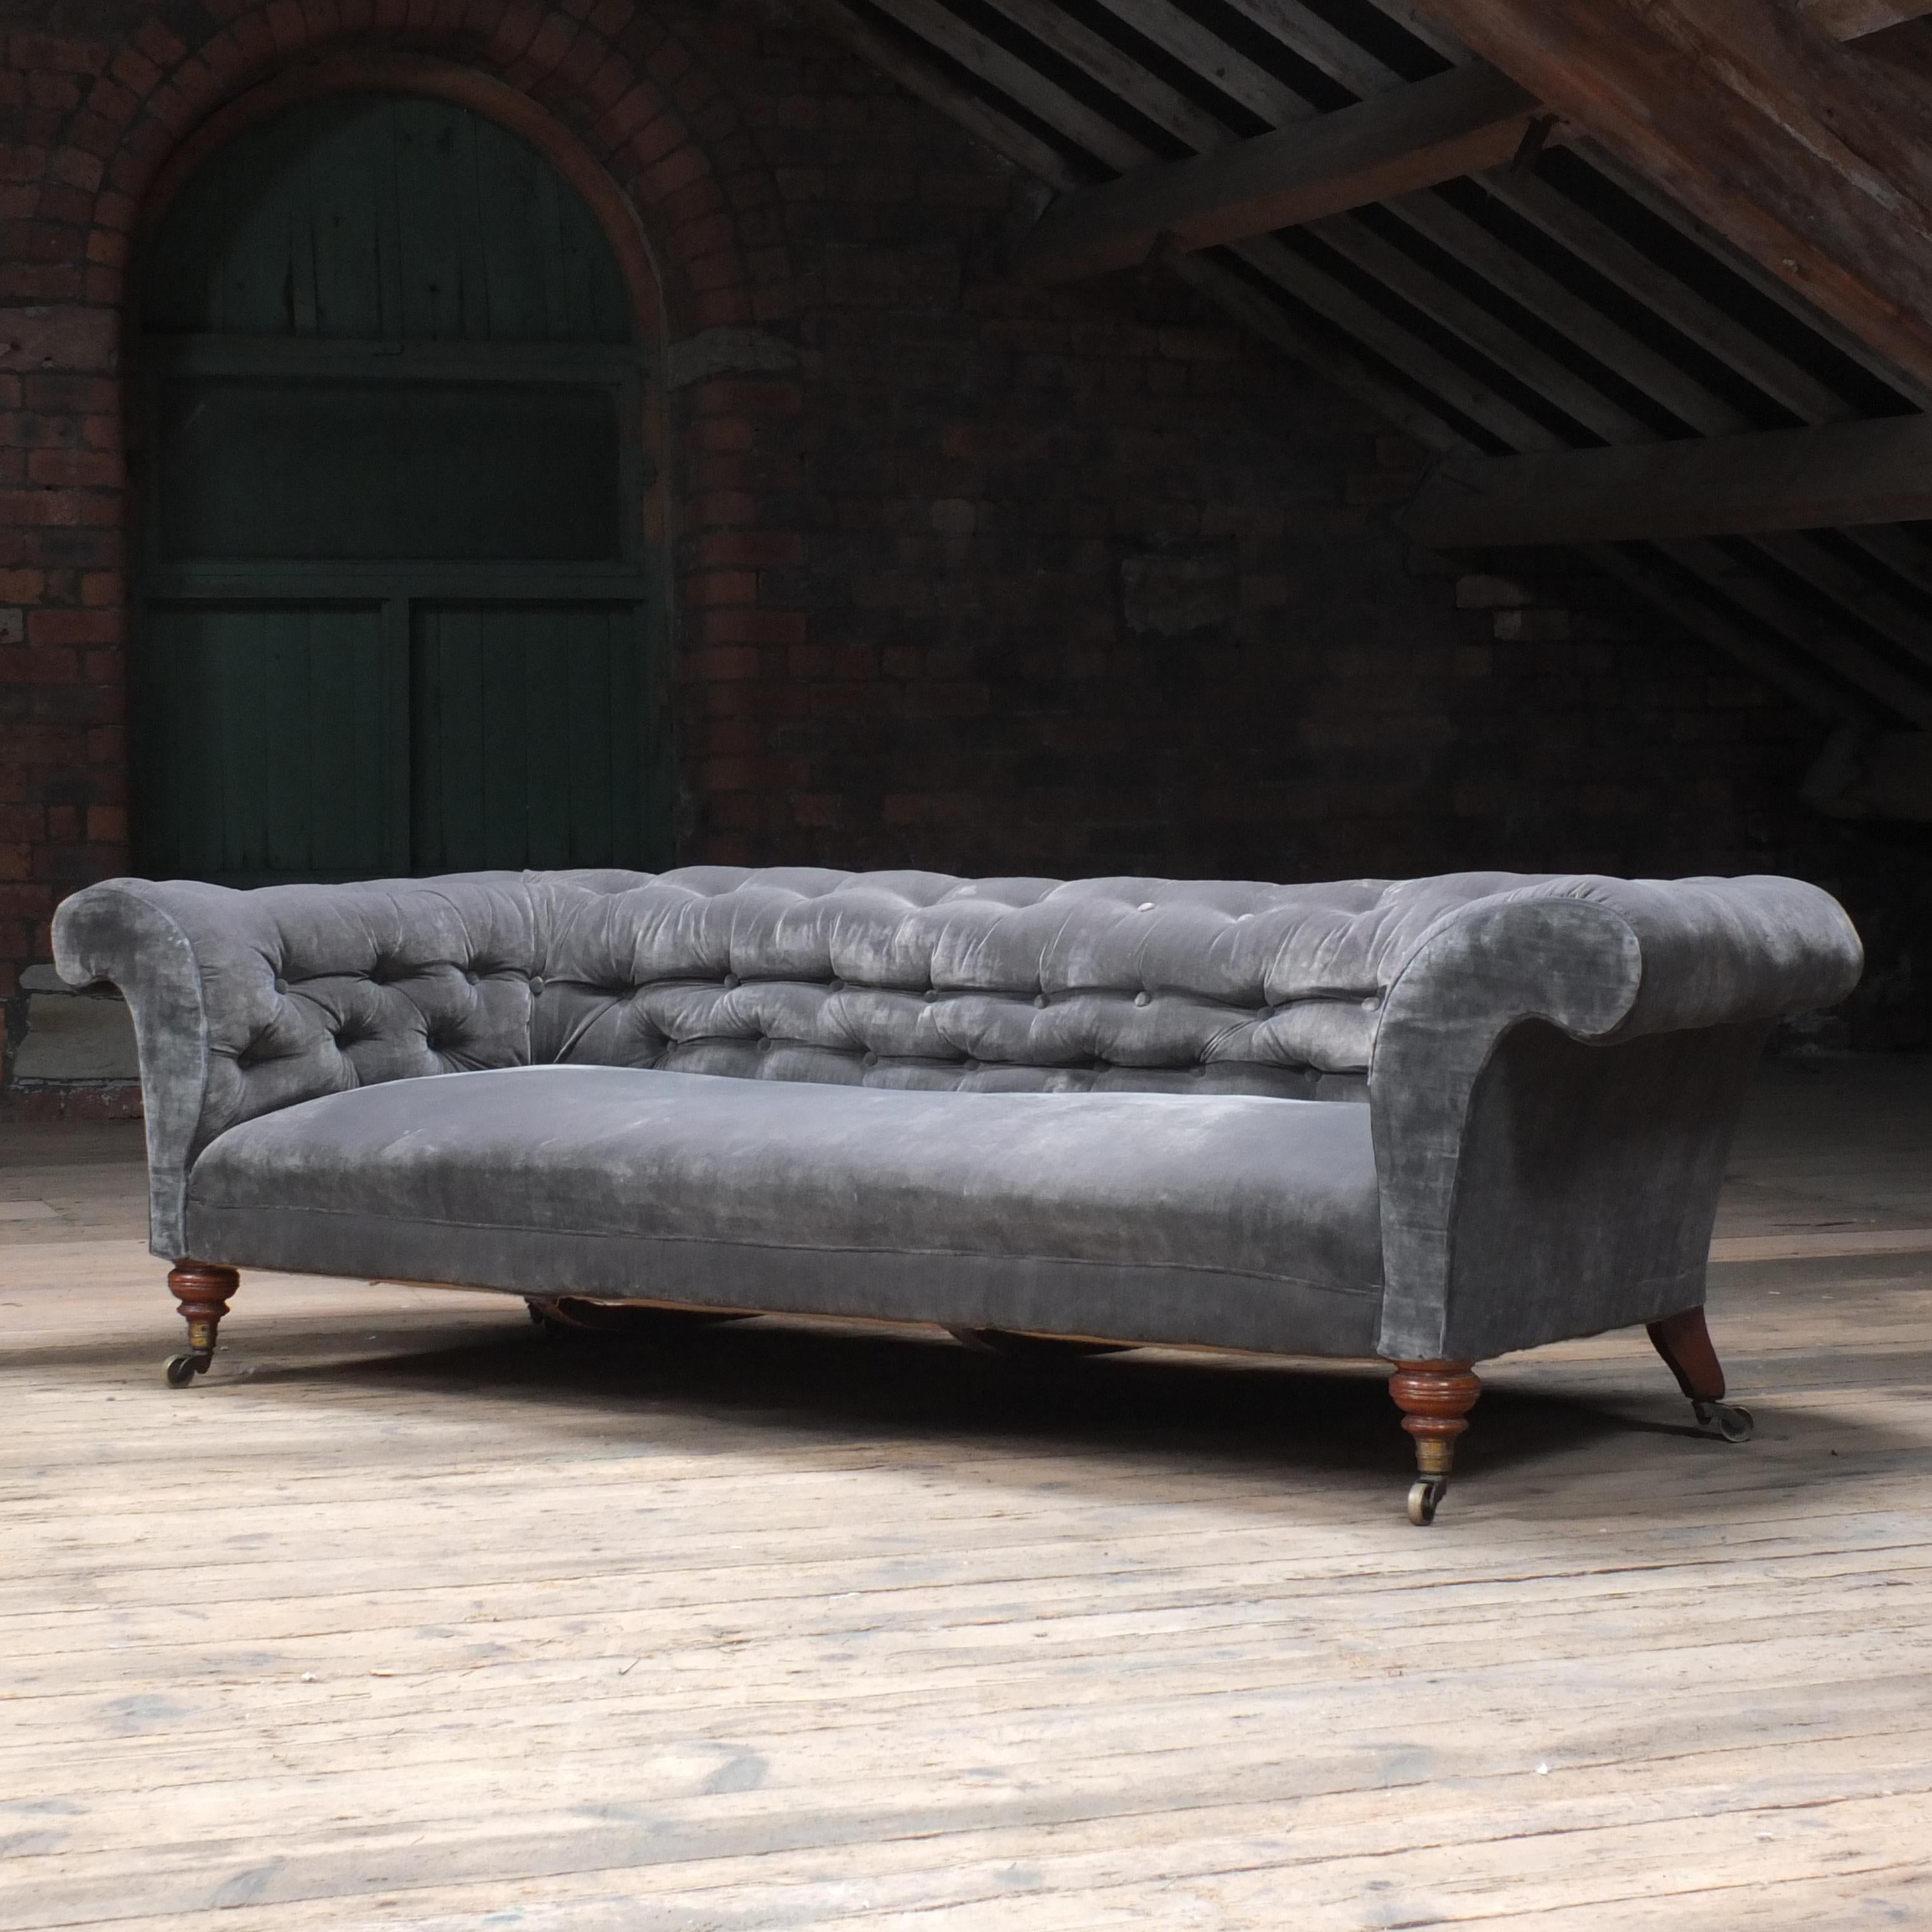 19th Century Antique English Chesterfield Sofa by Howard and Sons c1880 (INC UPHOLSTERY